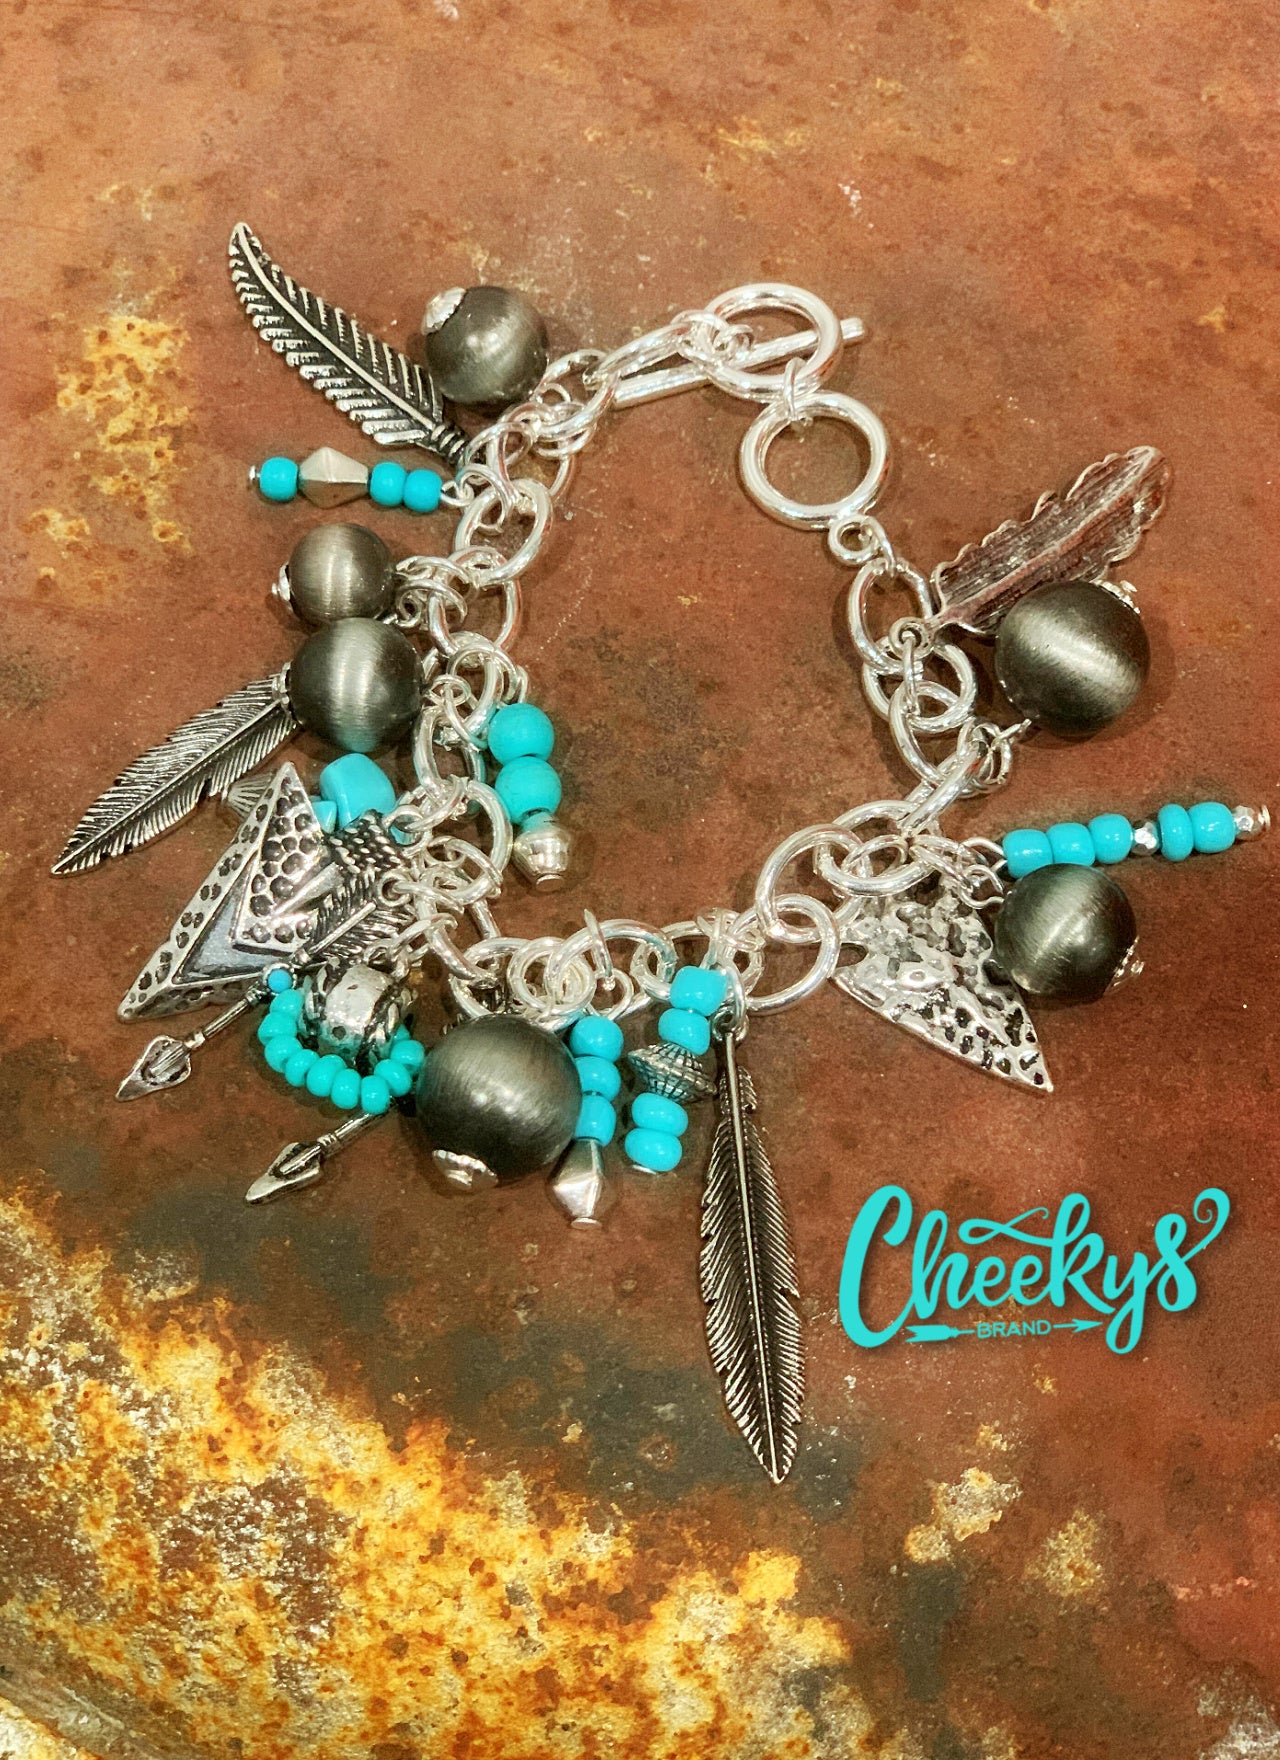 Shake Your Tail Feathers Bracelet Jewelry 19 